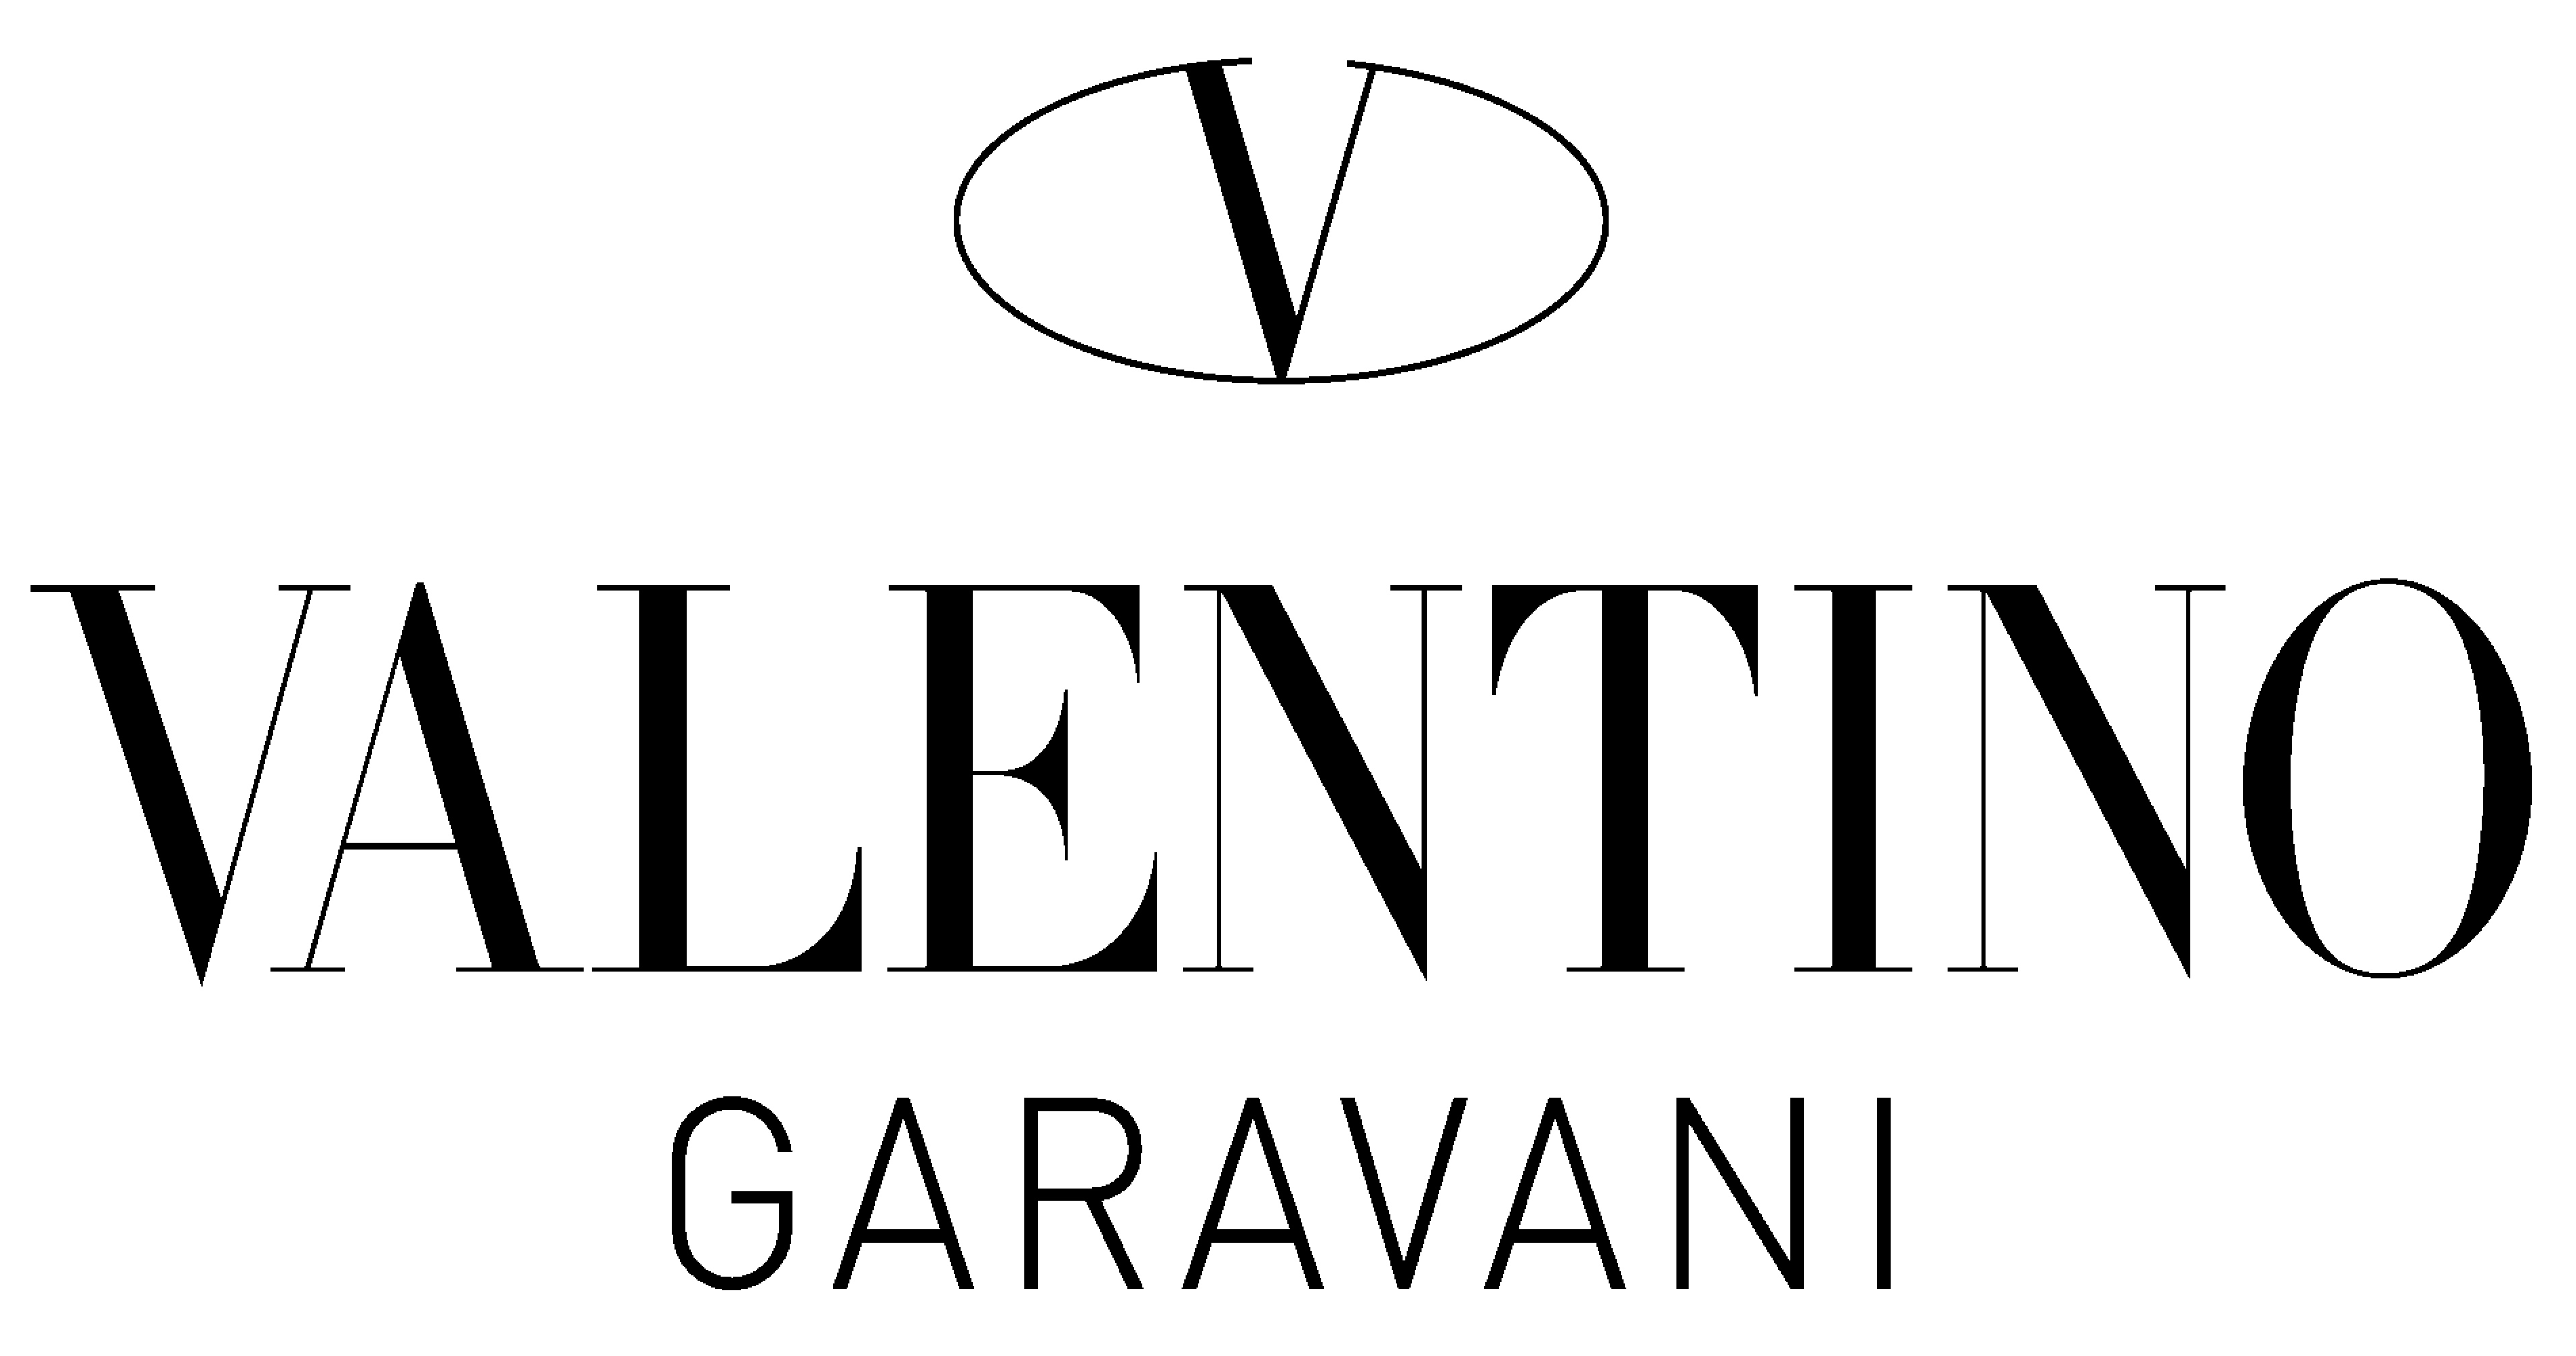 Expensive Clothes Logo - Top 10 Most Expensive Clothing Brands of World